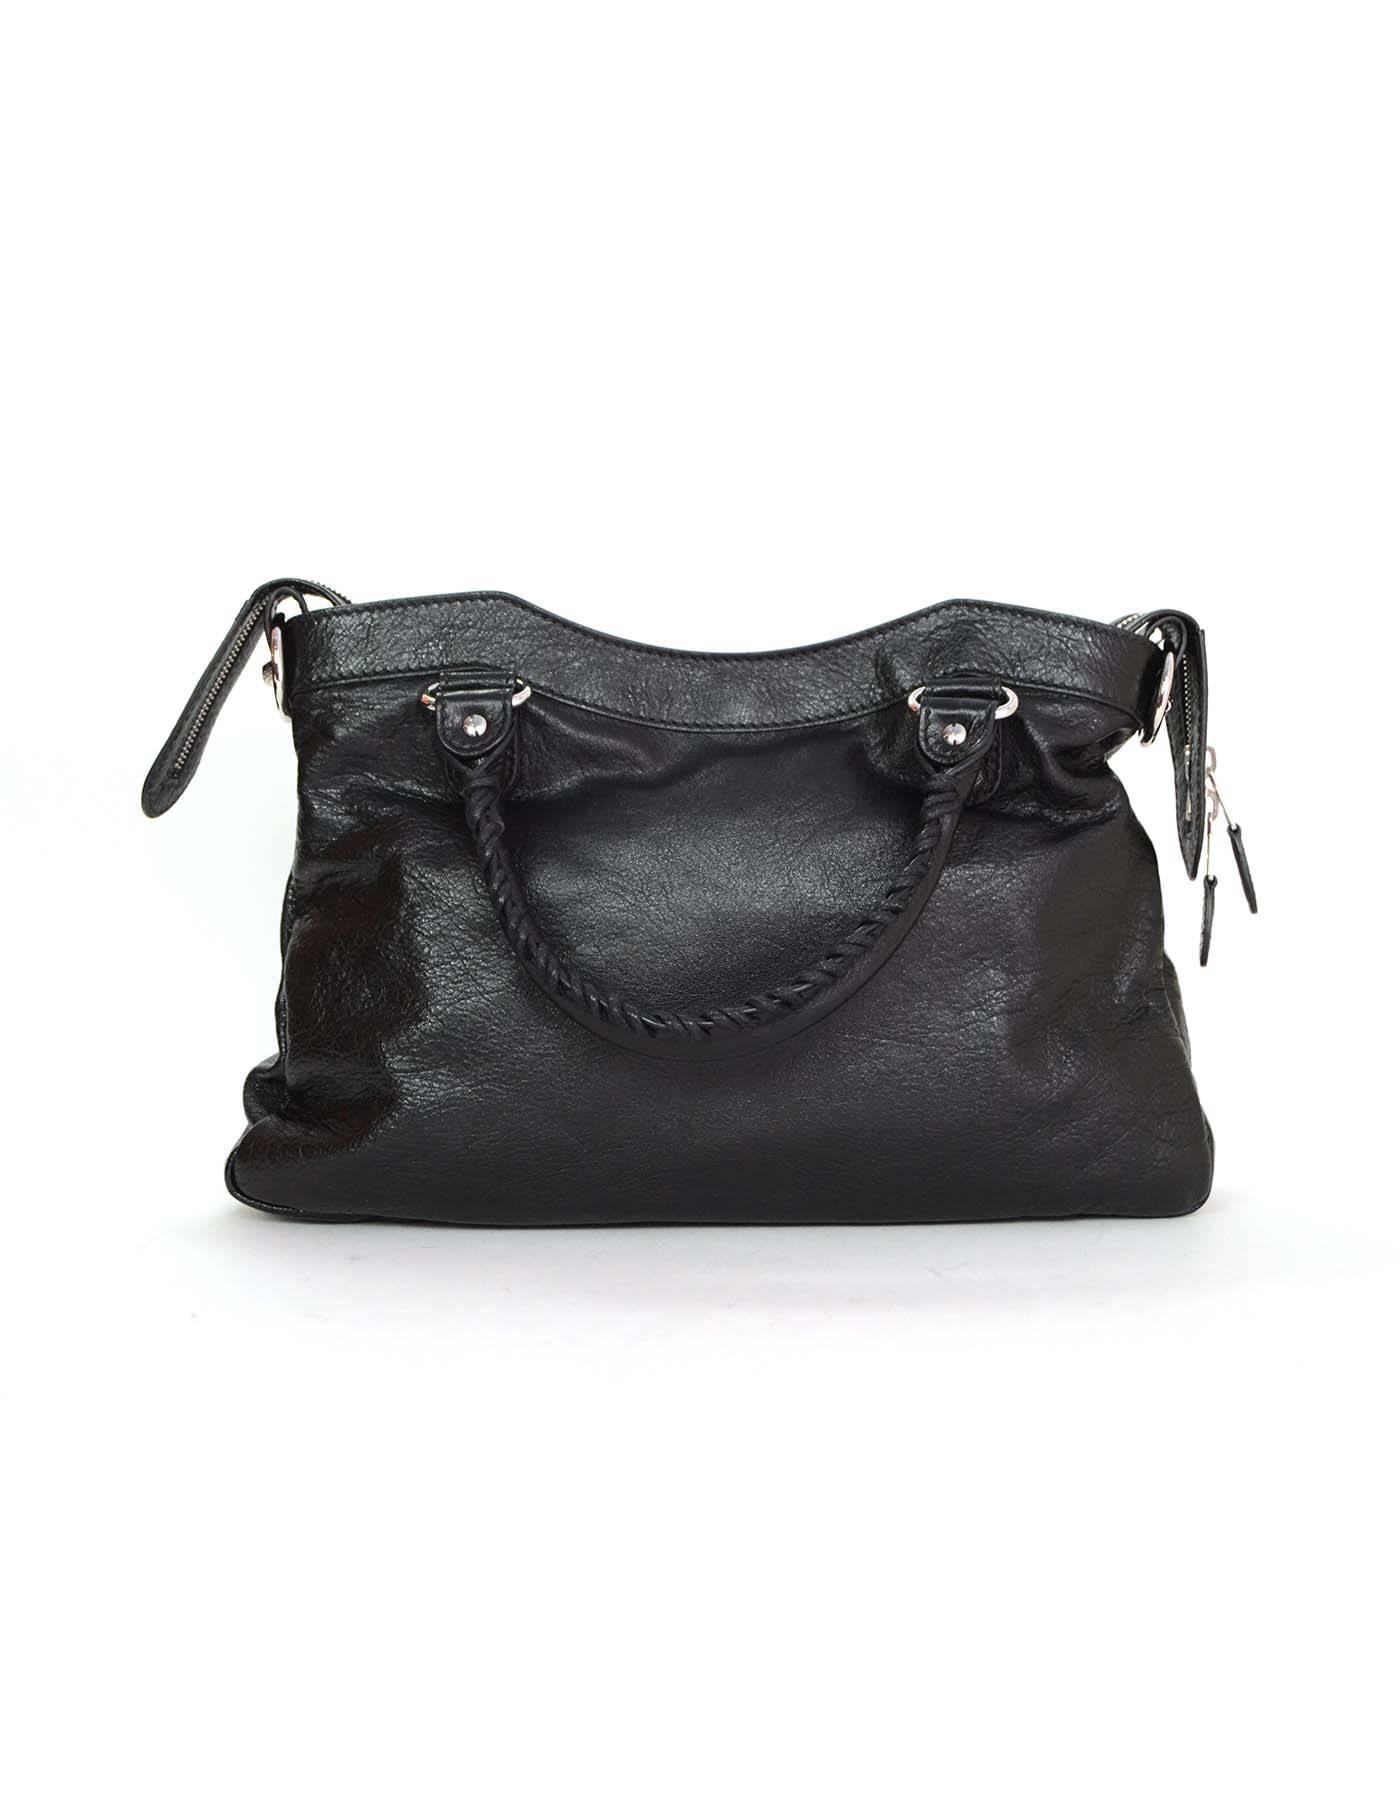 Balenciaga LIKE NEW Black Leather Town Crossbody Bag SHW In Excellent Condition In New York, NY